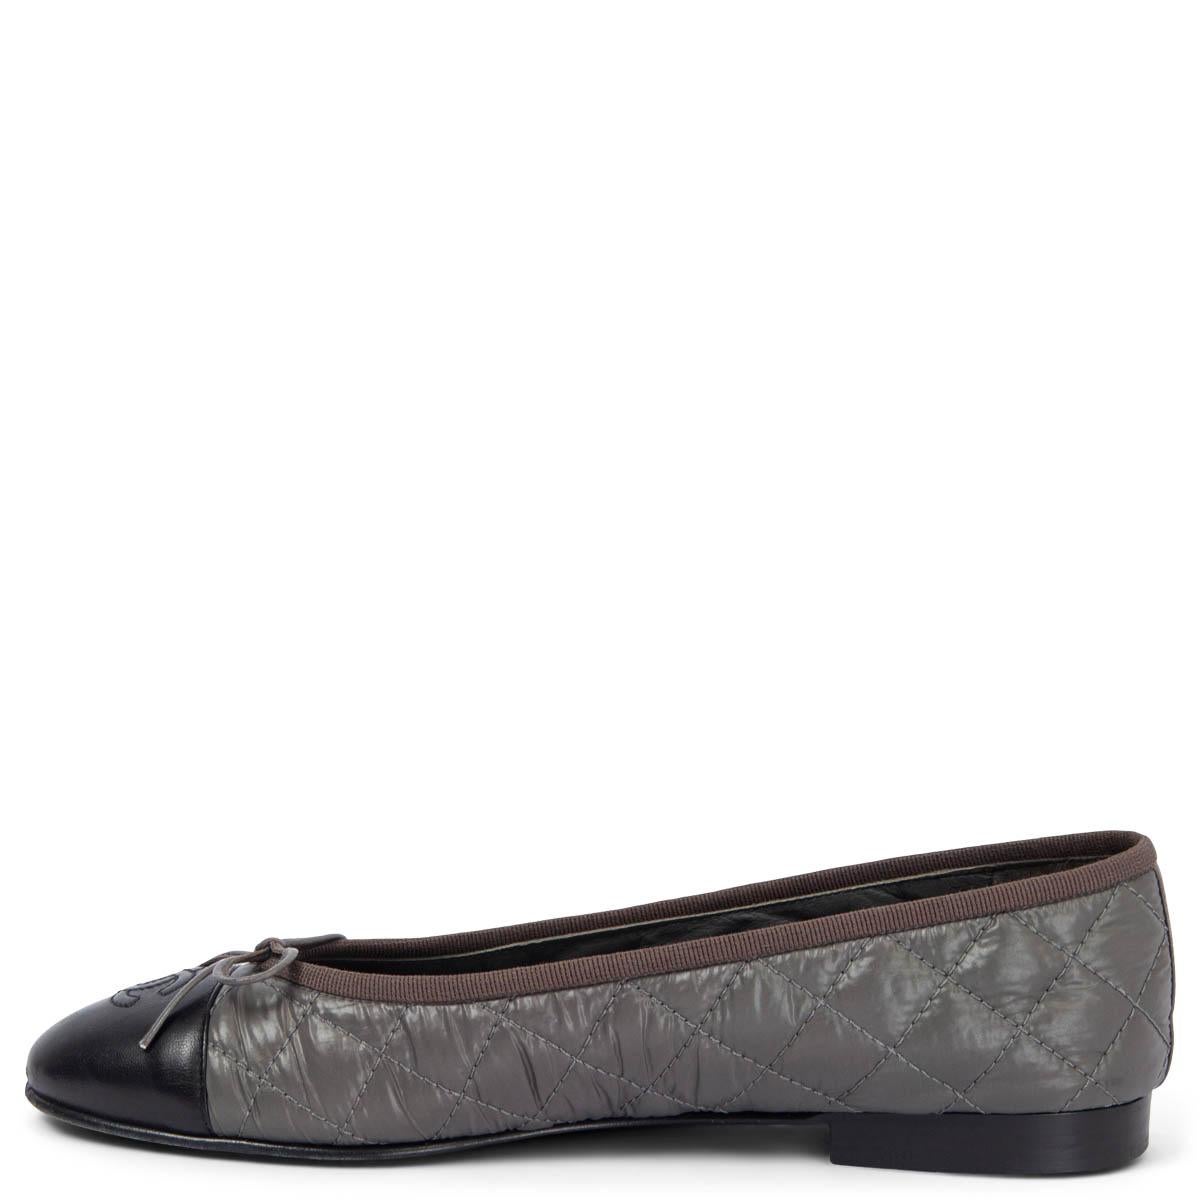 Women's CHANEL grey QUILTED nylon 2011 11A Ballet Flats Shoes 38.5